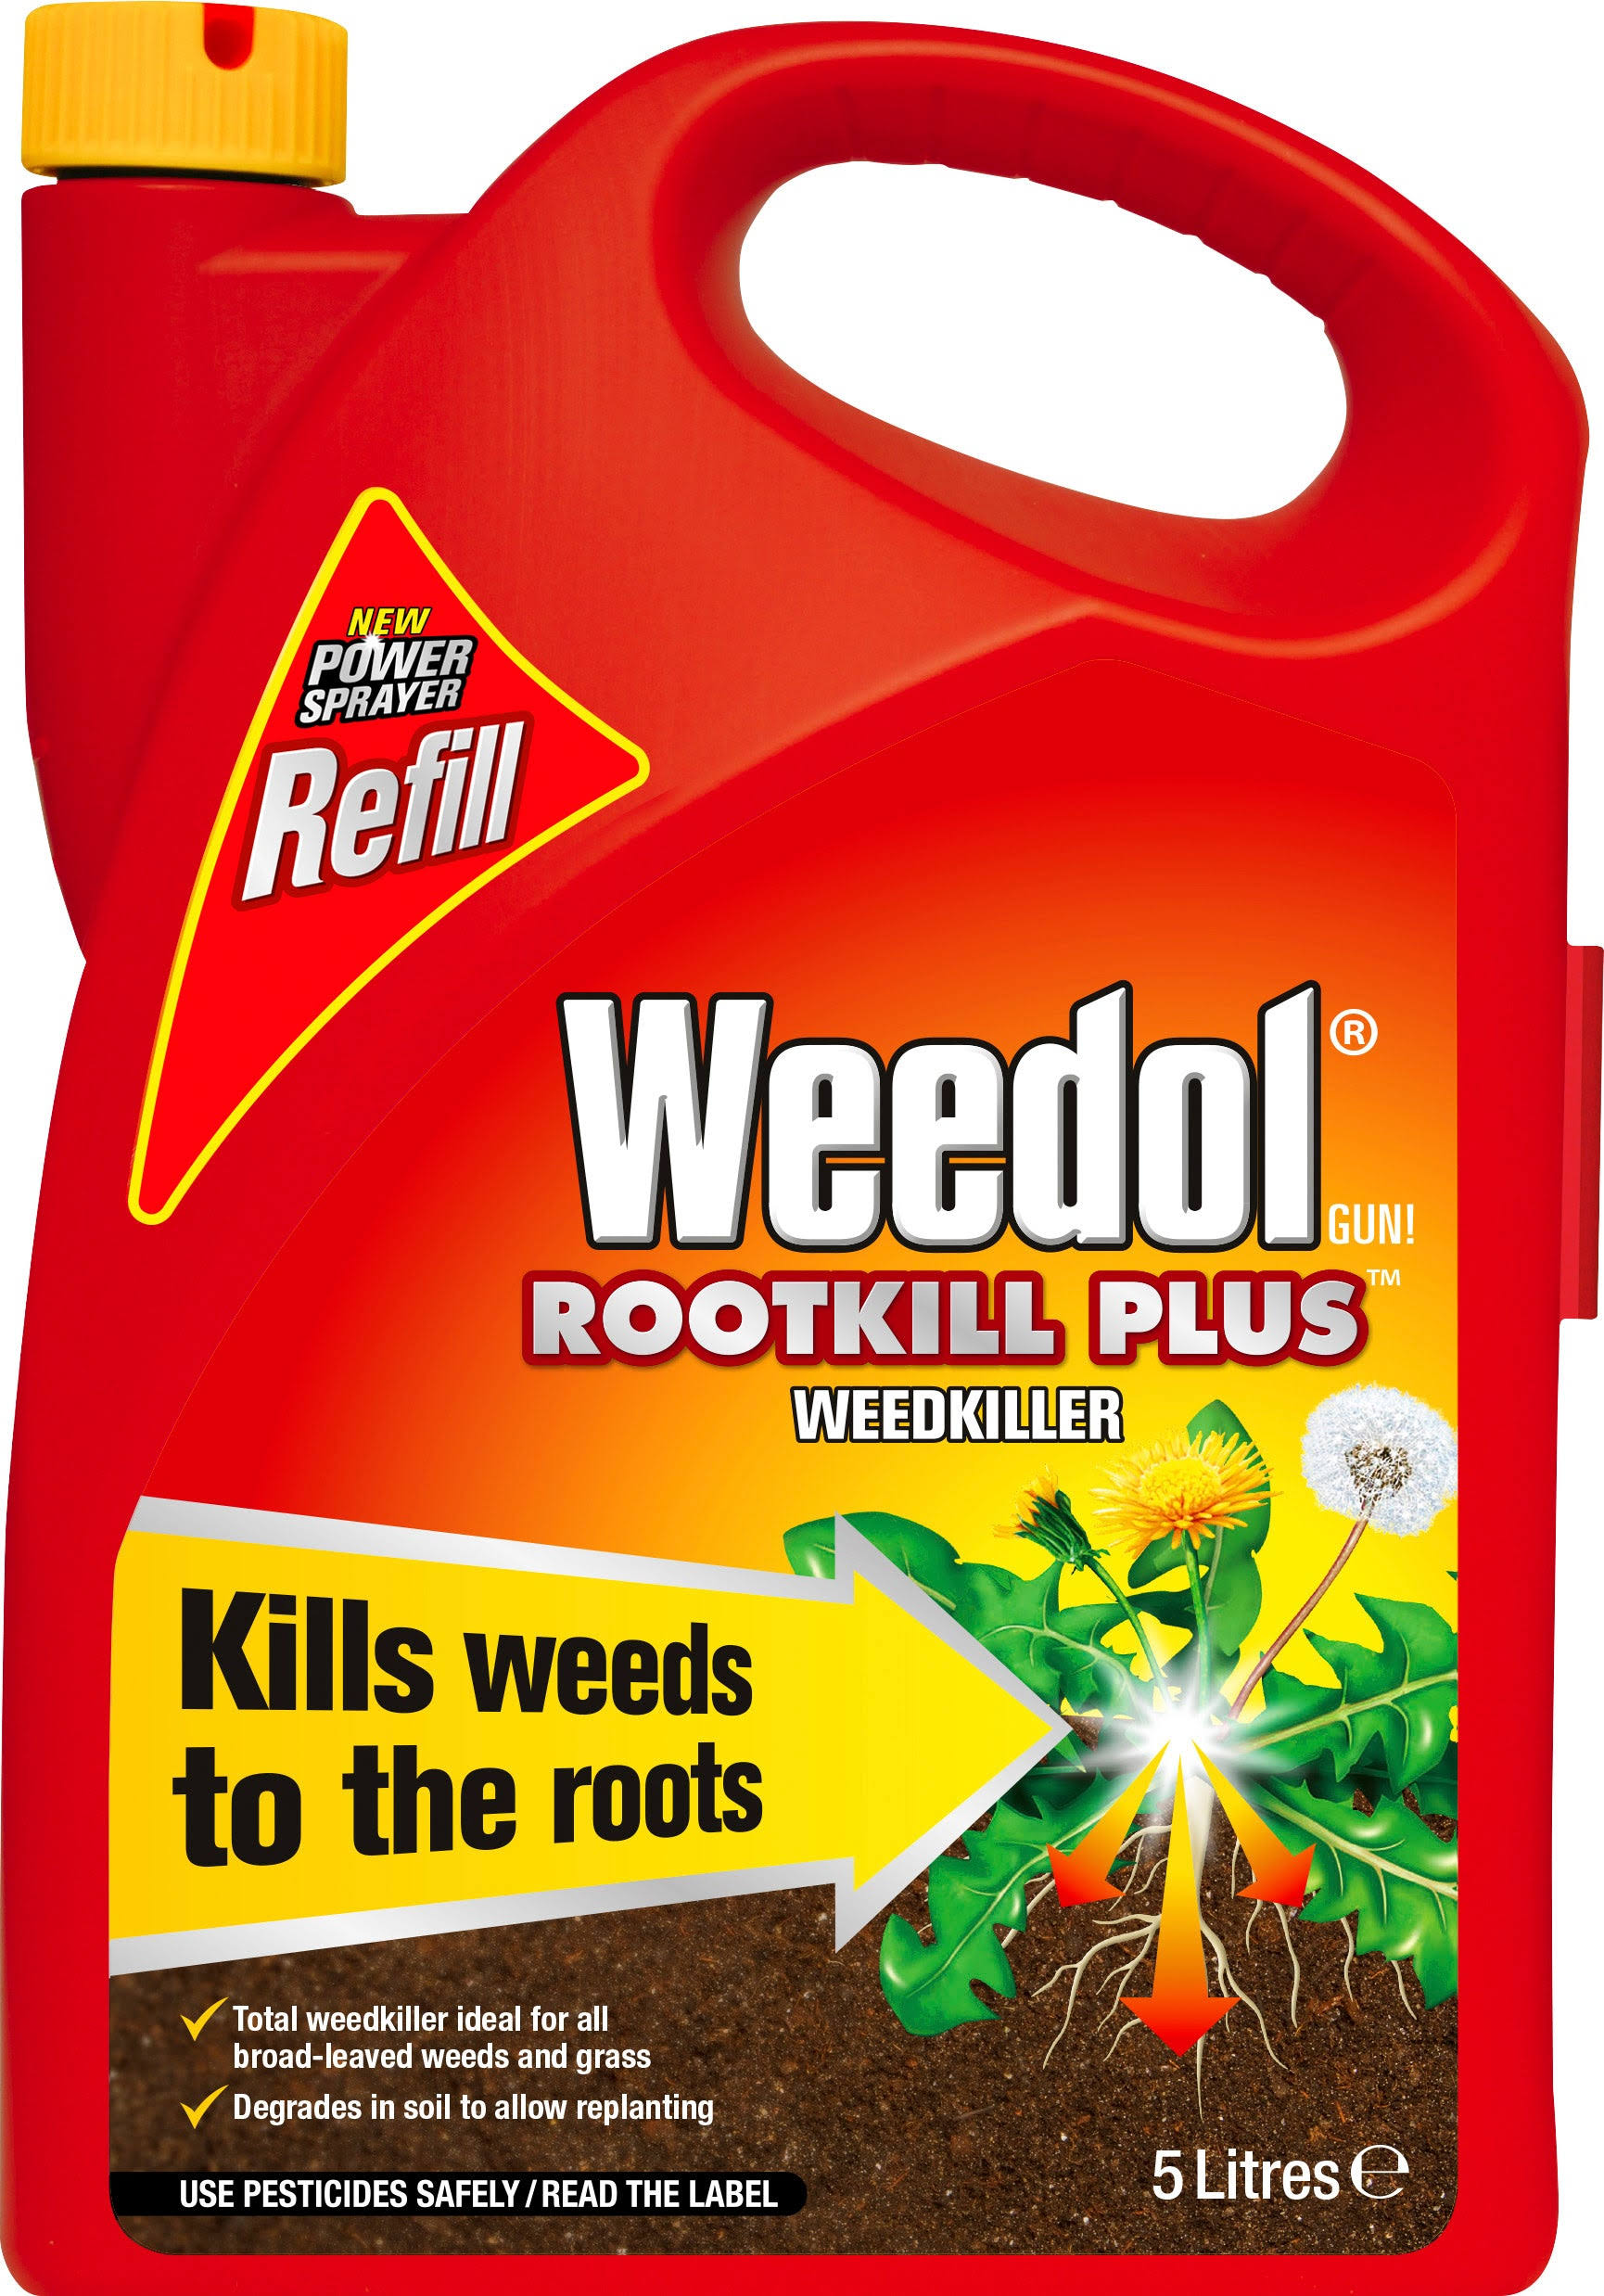 Weedol 200020 Rootkill Plus 5 Litre Weedkiller Power Sprayer Refill, Clear